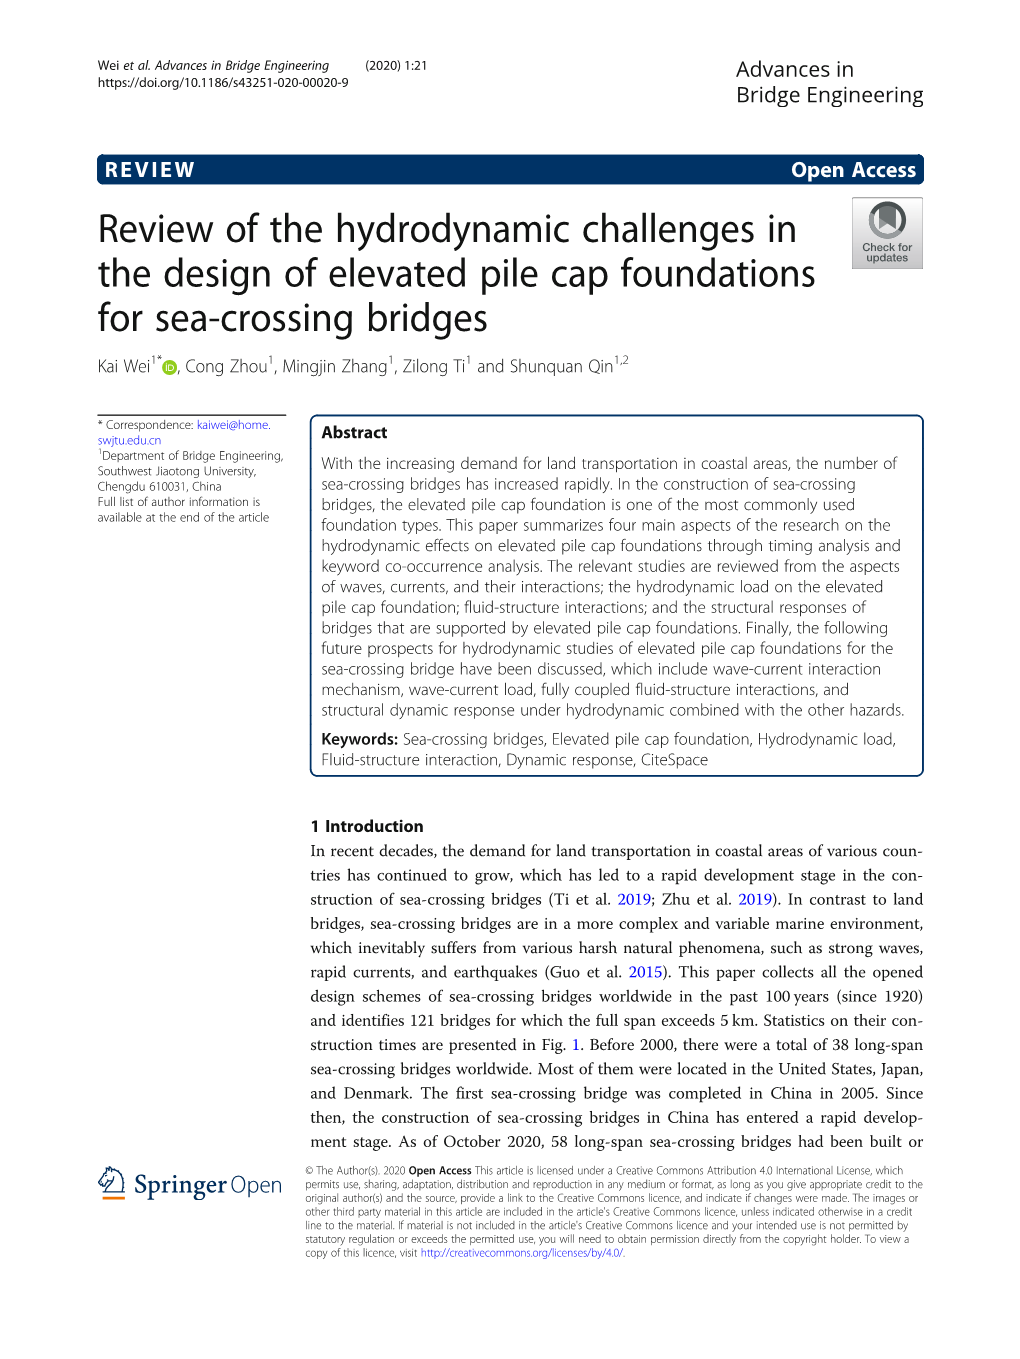 Review of the Hydrodynamic Challenges in the Design Of